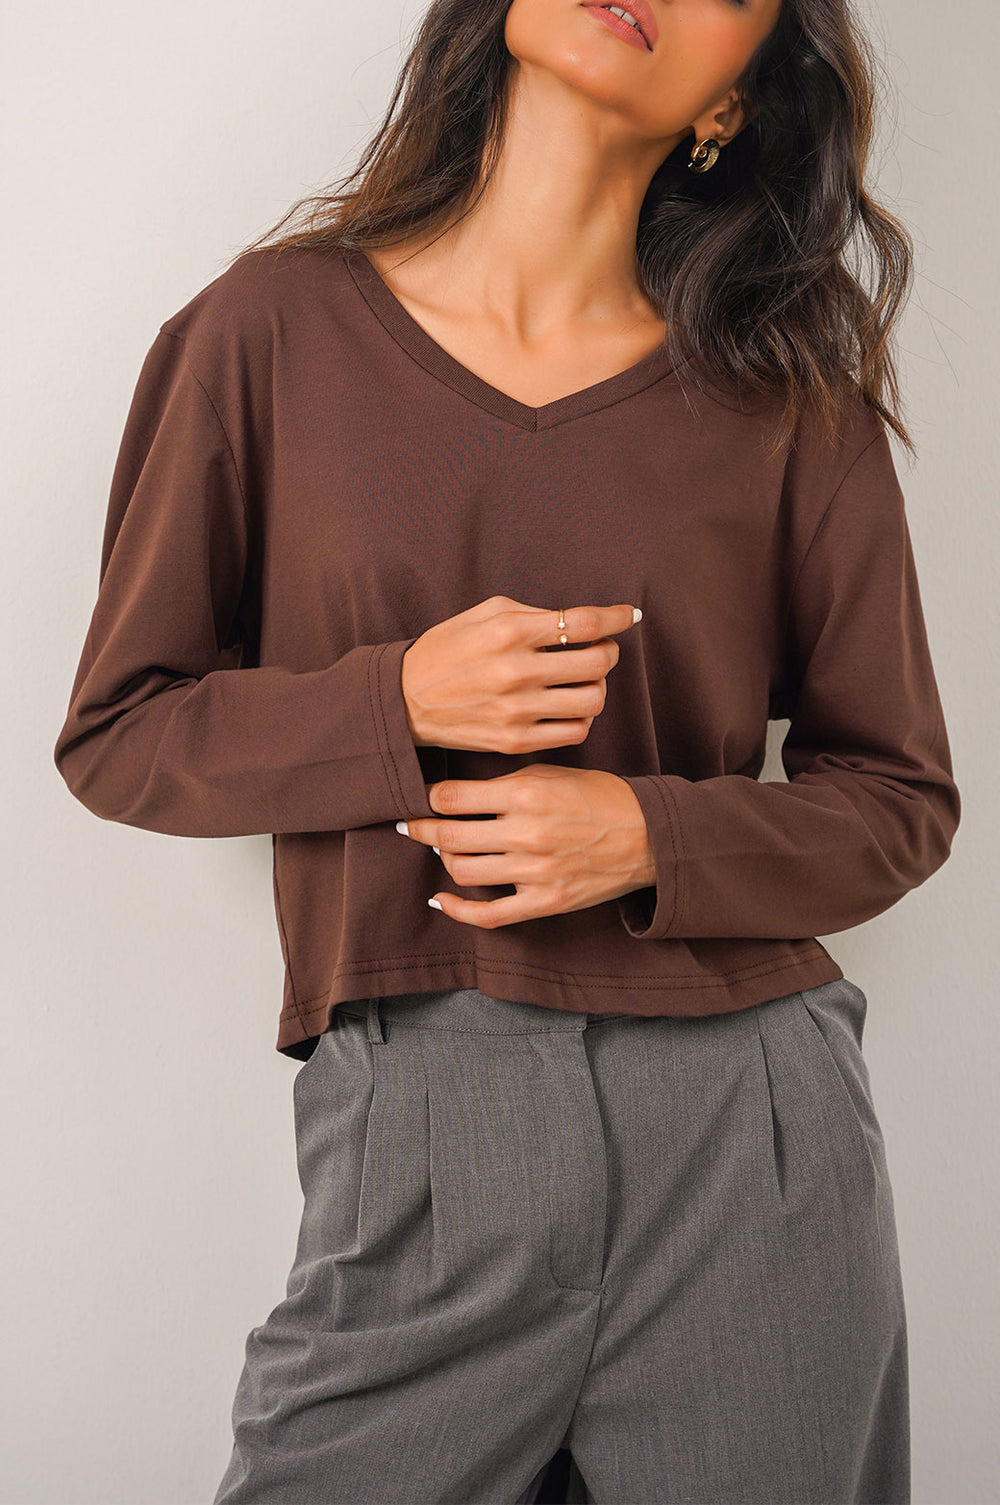 BROWN CASUAL V-NECK T-SHIRT